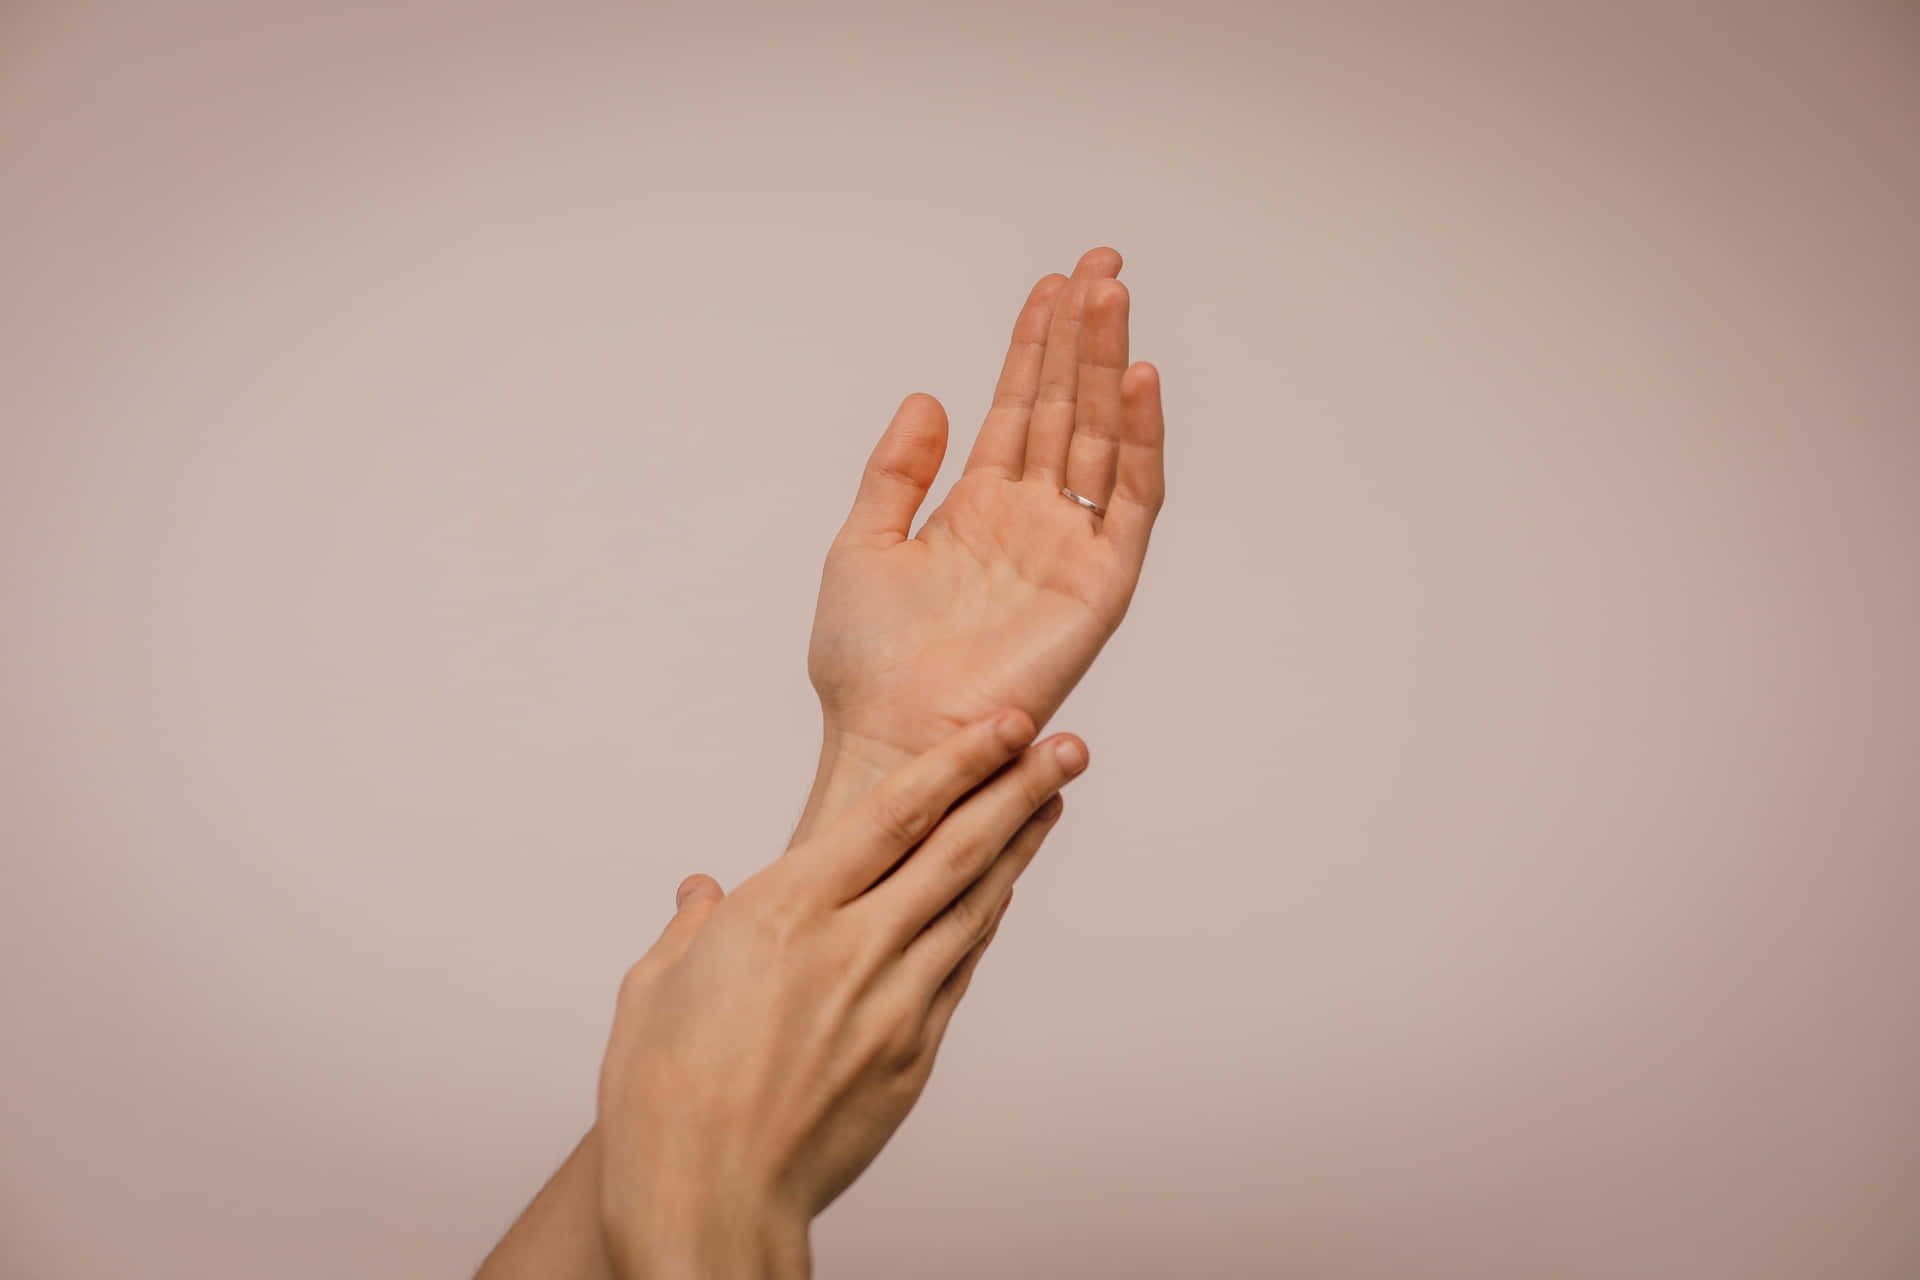 A pair of hands reaching up to the sky